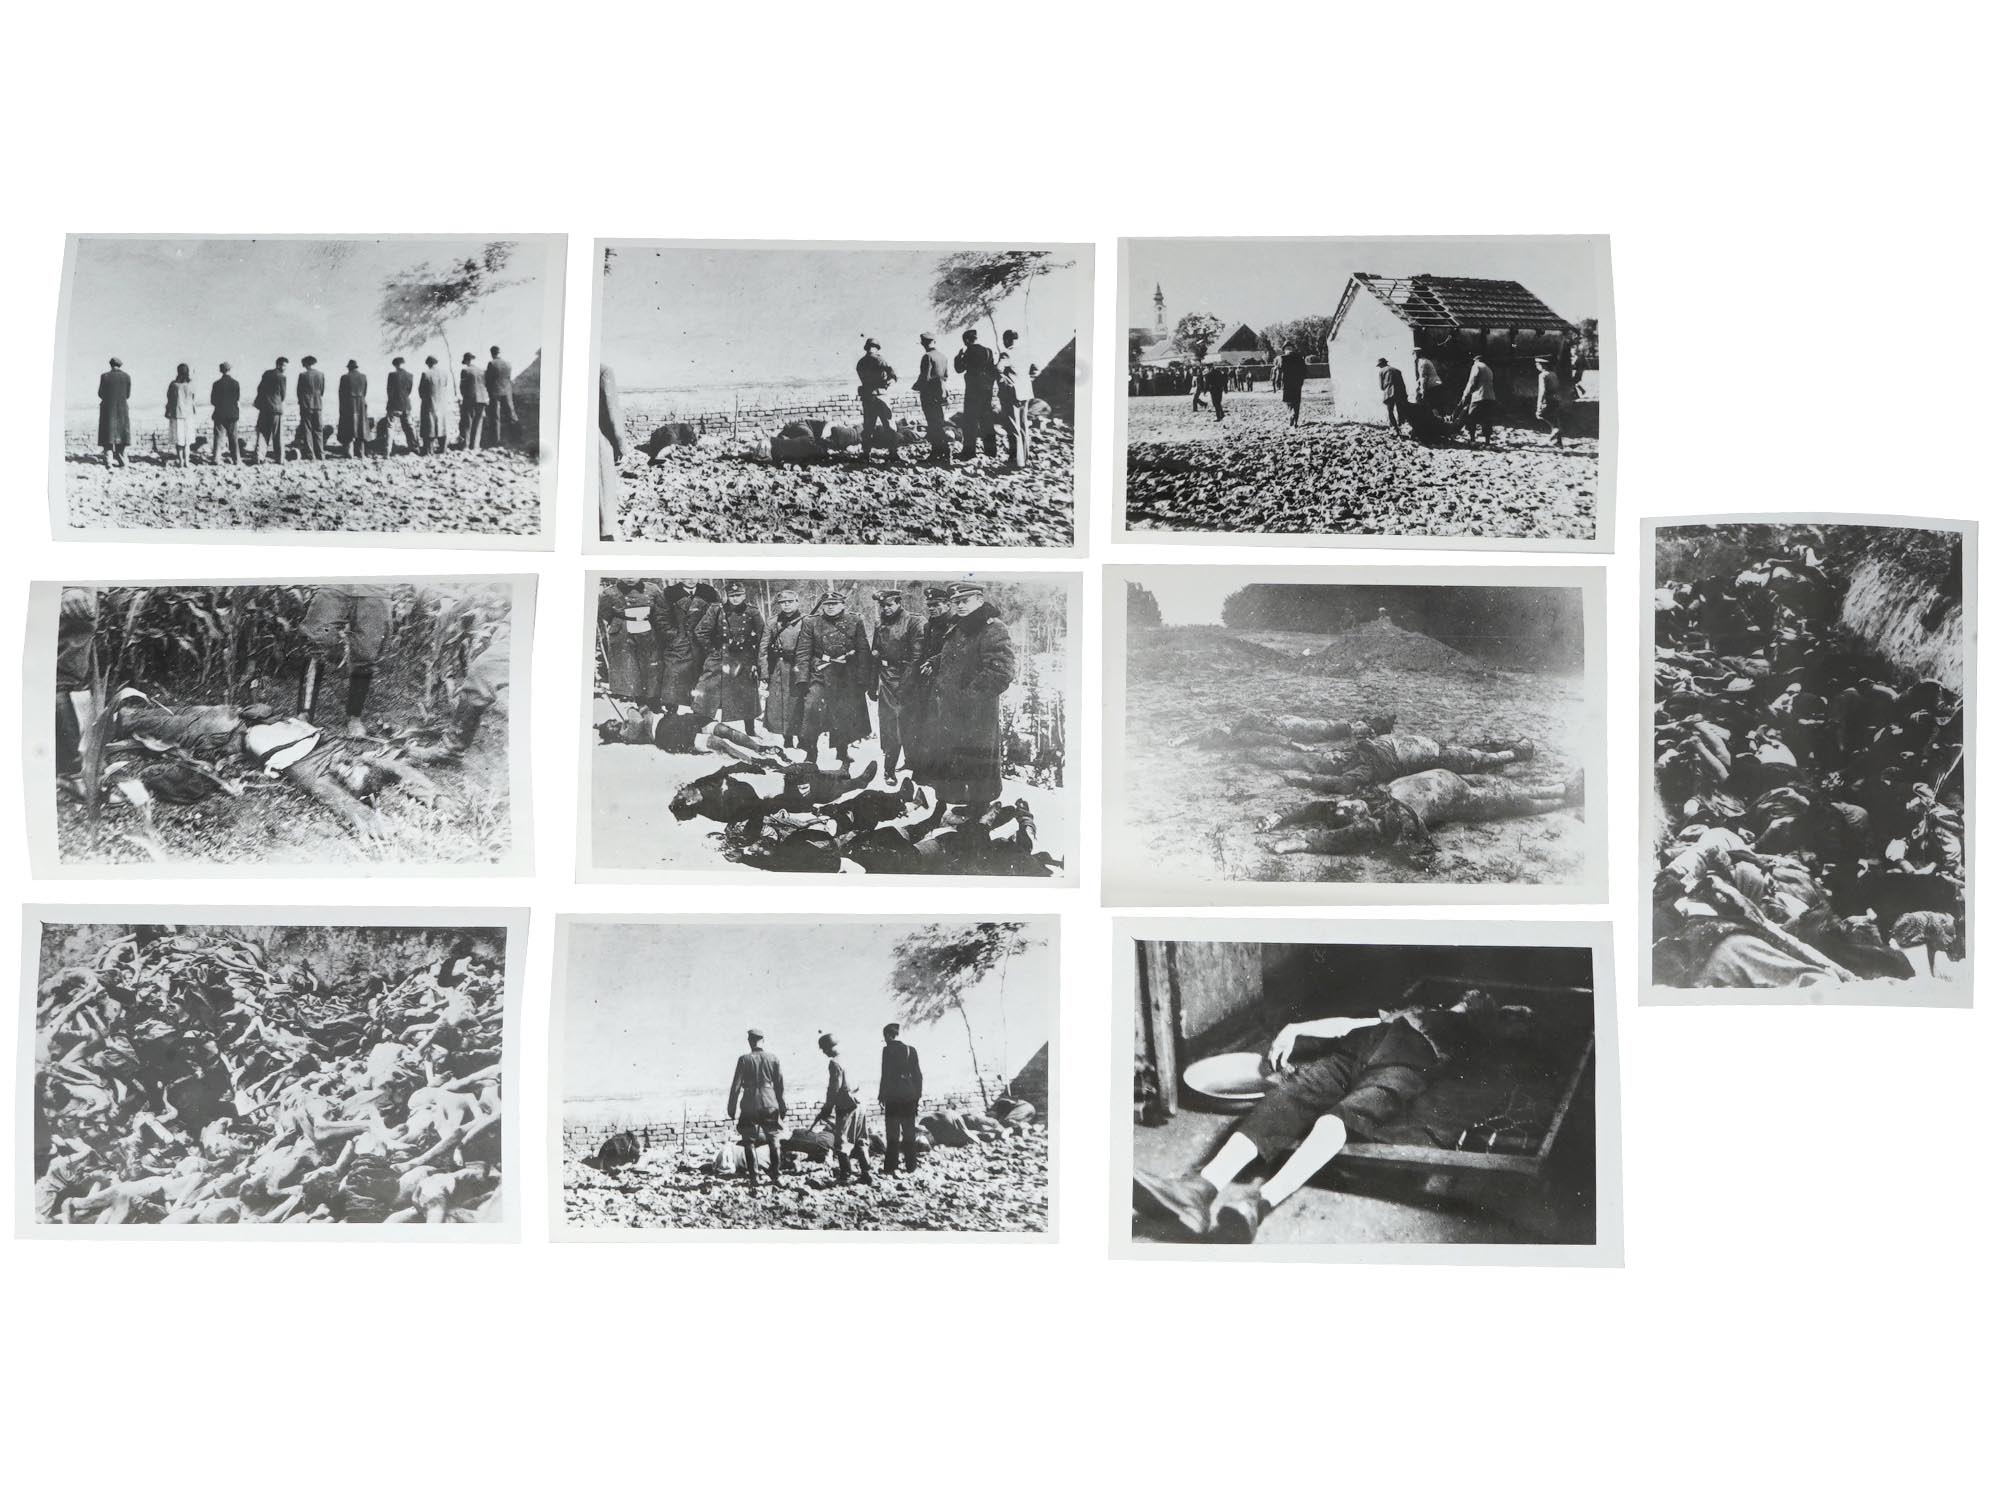 GROUP PHOTOS OF CONCENTRATION CAMPS POLISH ARCHIVES PIC-0